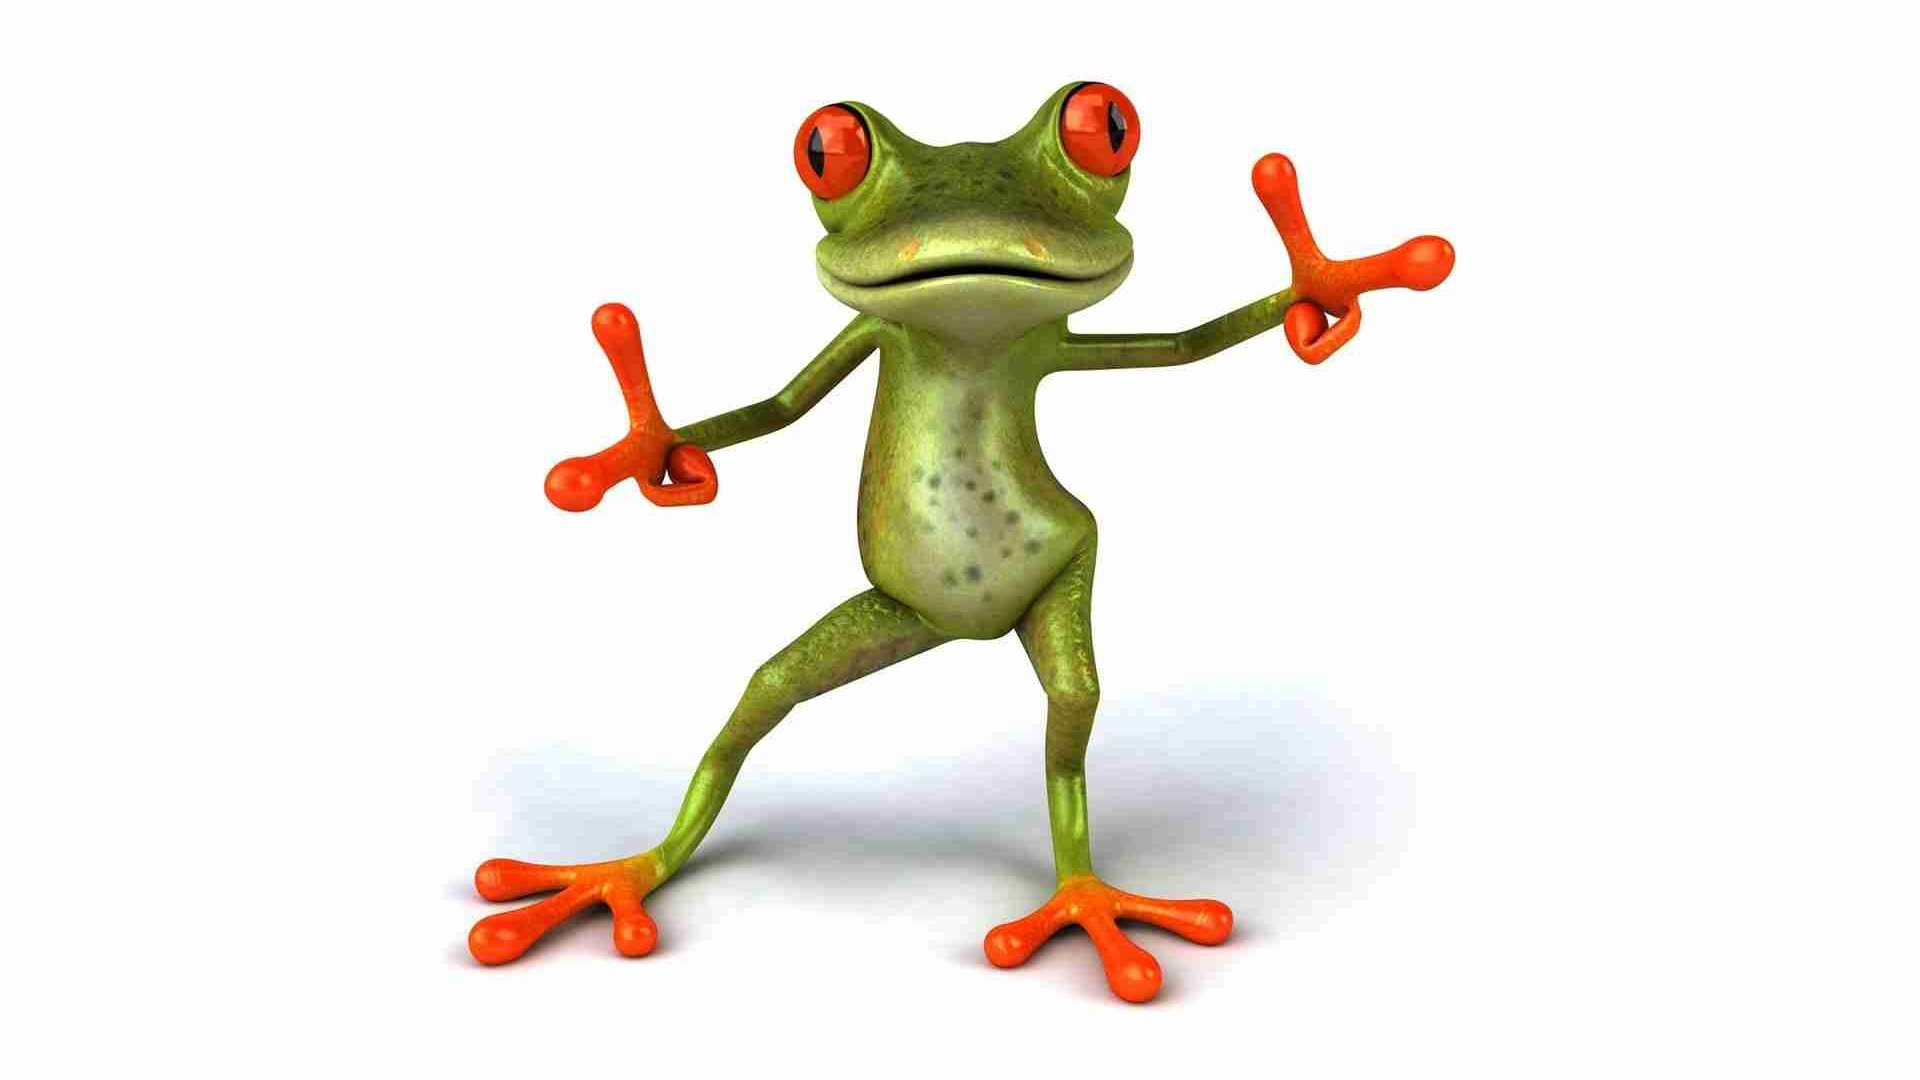 Free download wallpaper Funny Frog Wallpaper HD wallpaper background desktop [1920x1200] for your Desktop, Mobile & Tablet. Explore Funny Frog Wallpaper Desktop. Cute Frog Wallpaper, Frog Valentine Wallpaper Background